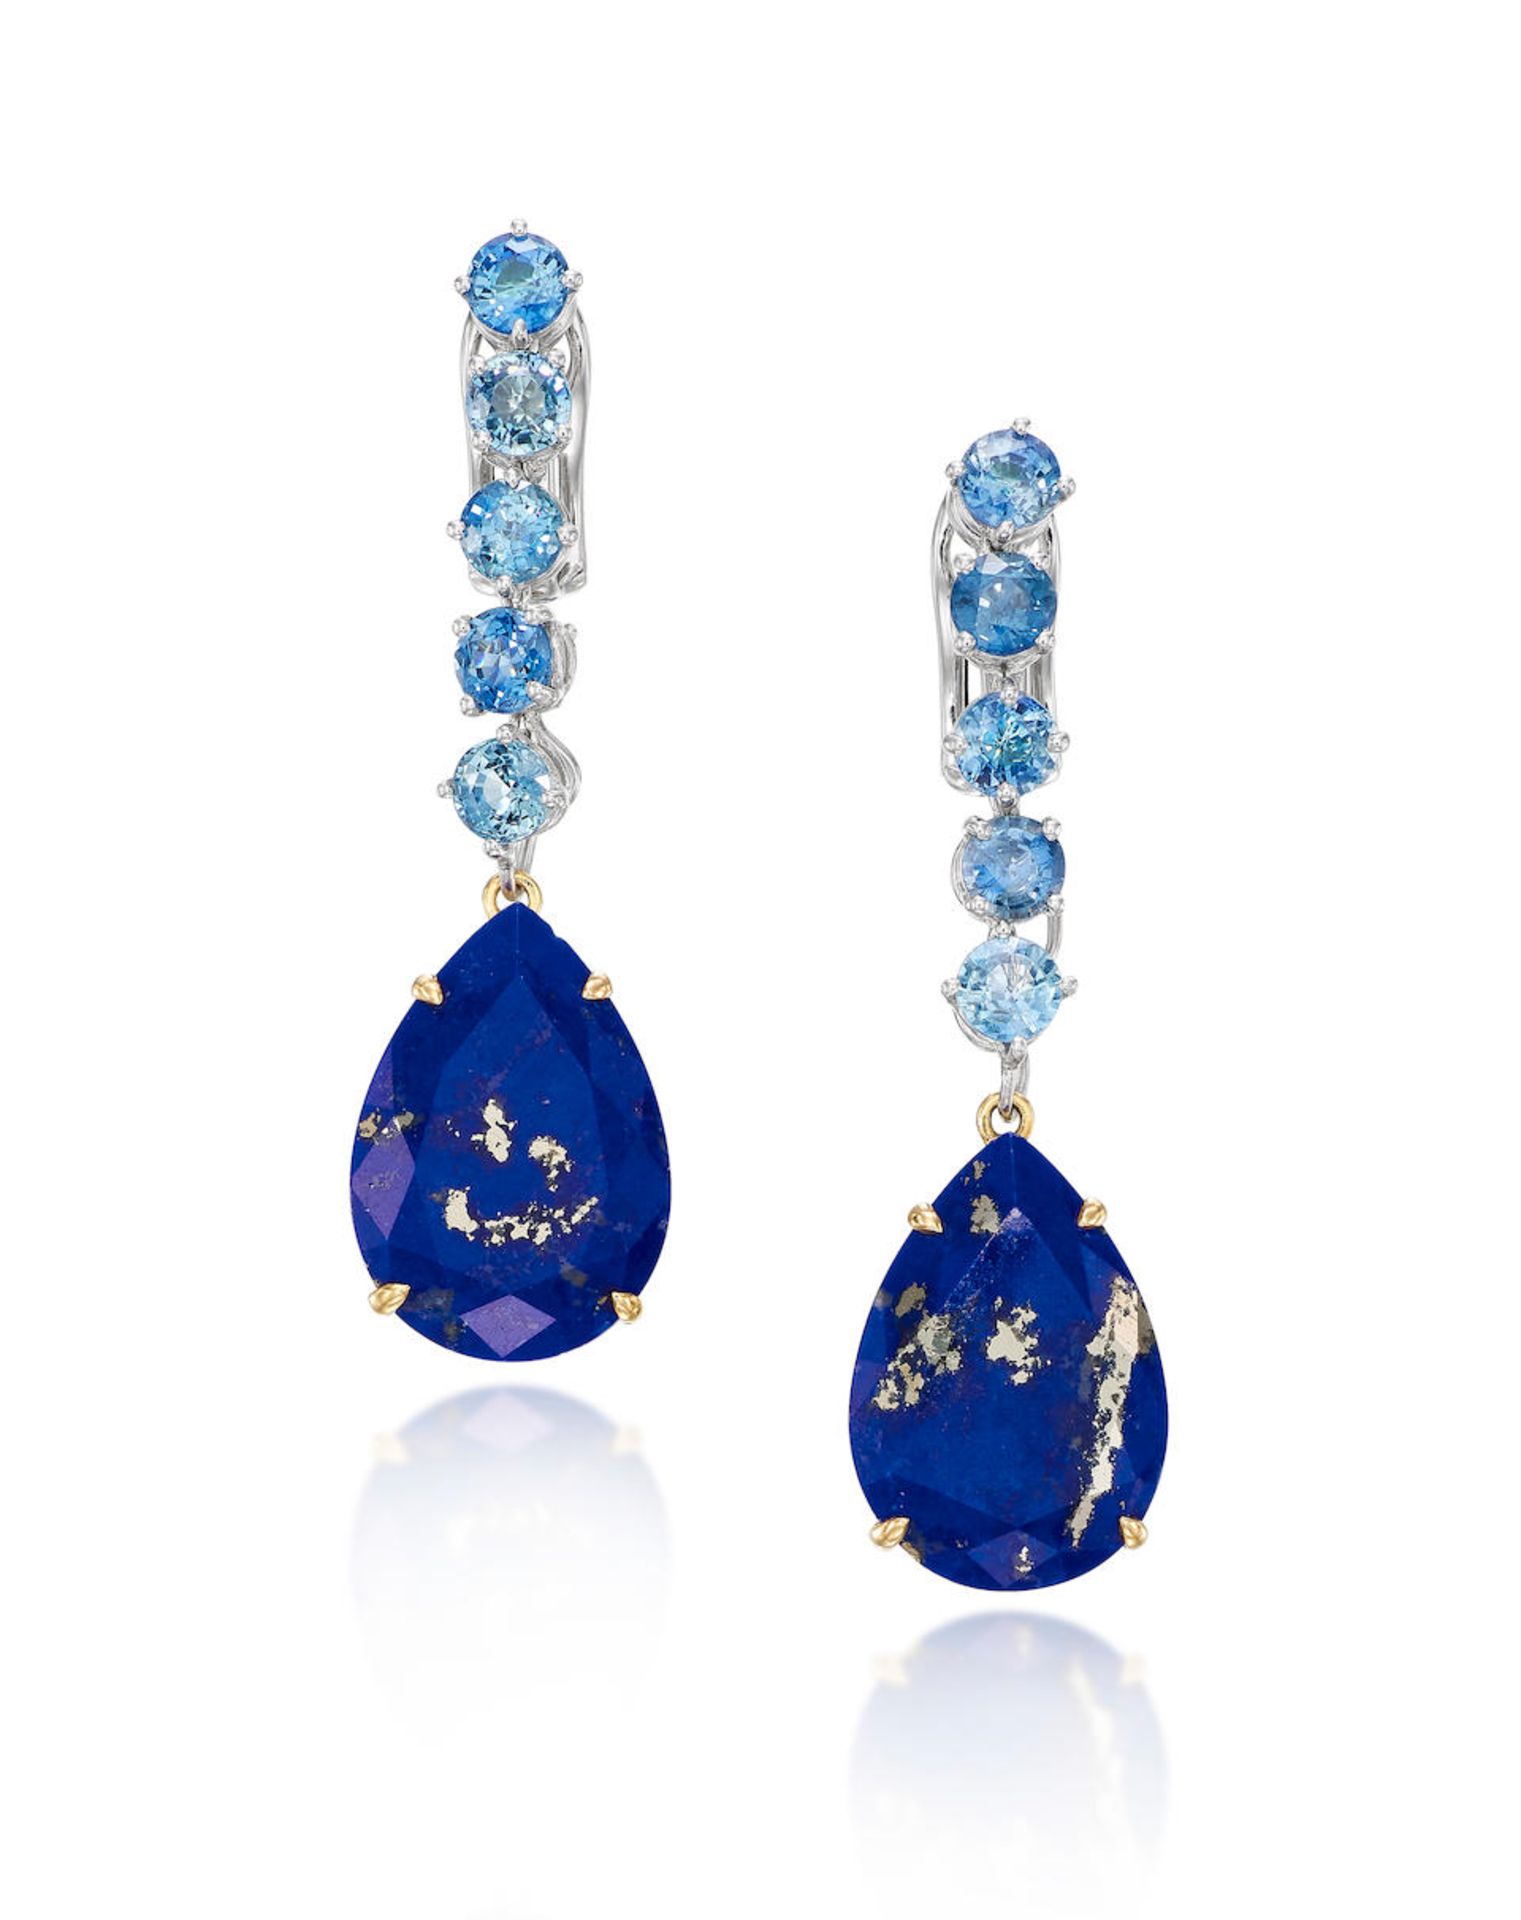 PAOLO COSTAGLI: PAIR OF LAPIS LAZULI AND SAPPHIRE PENDENT EARRINGS